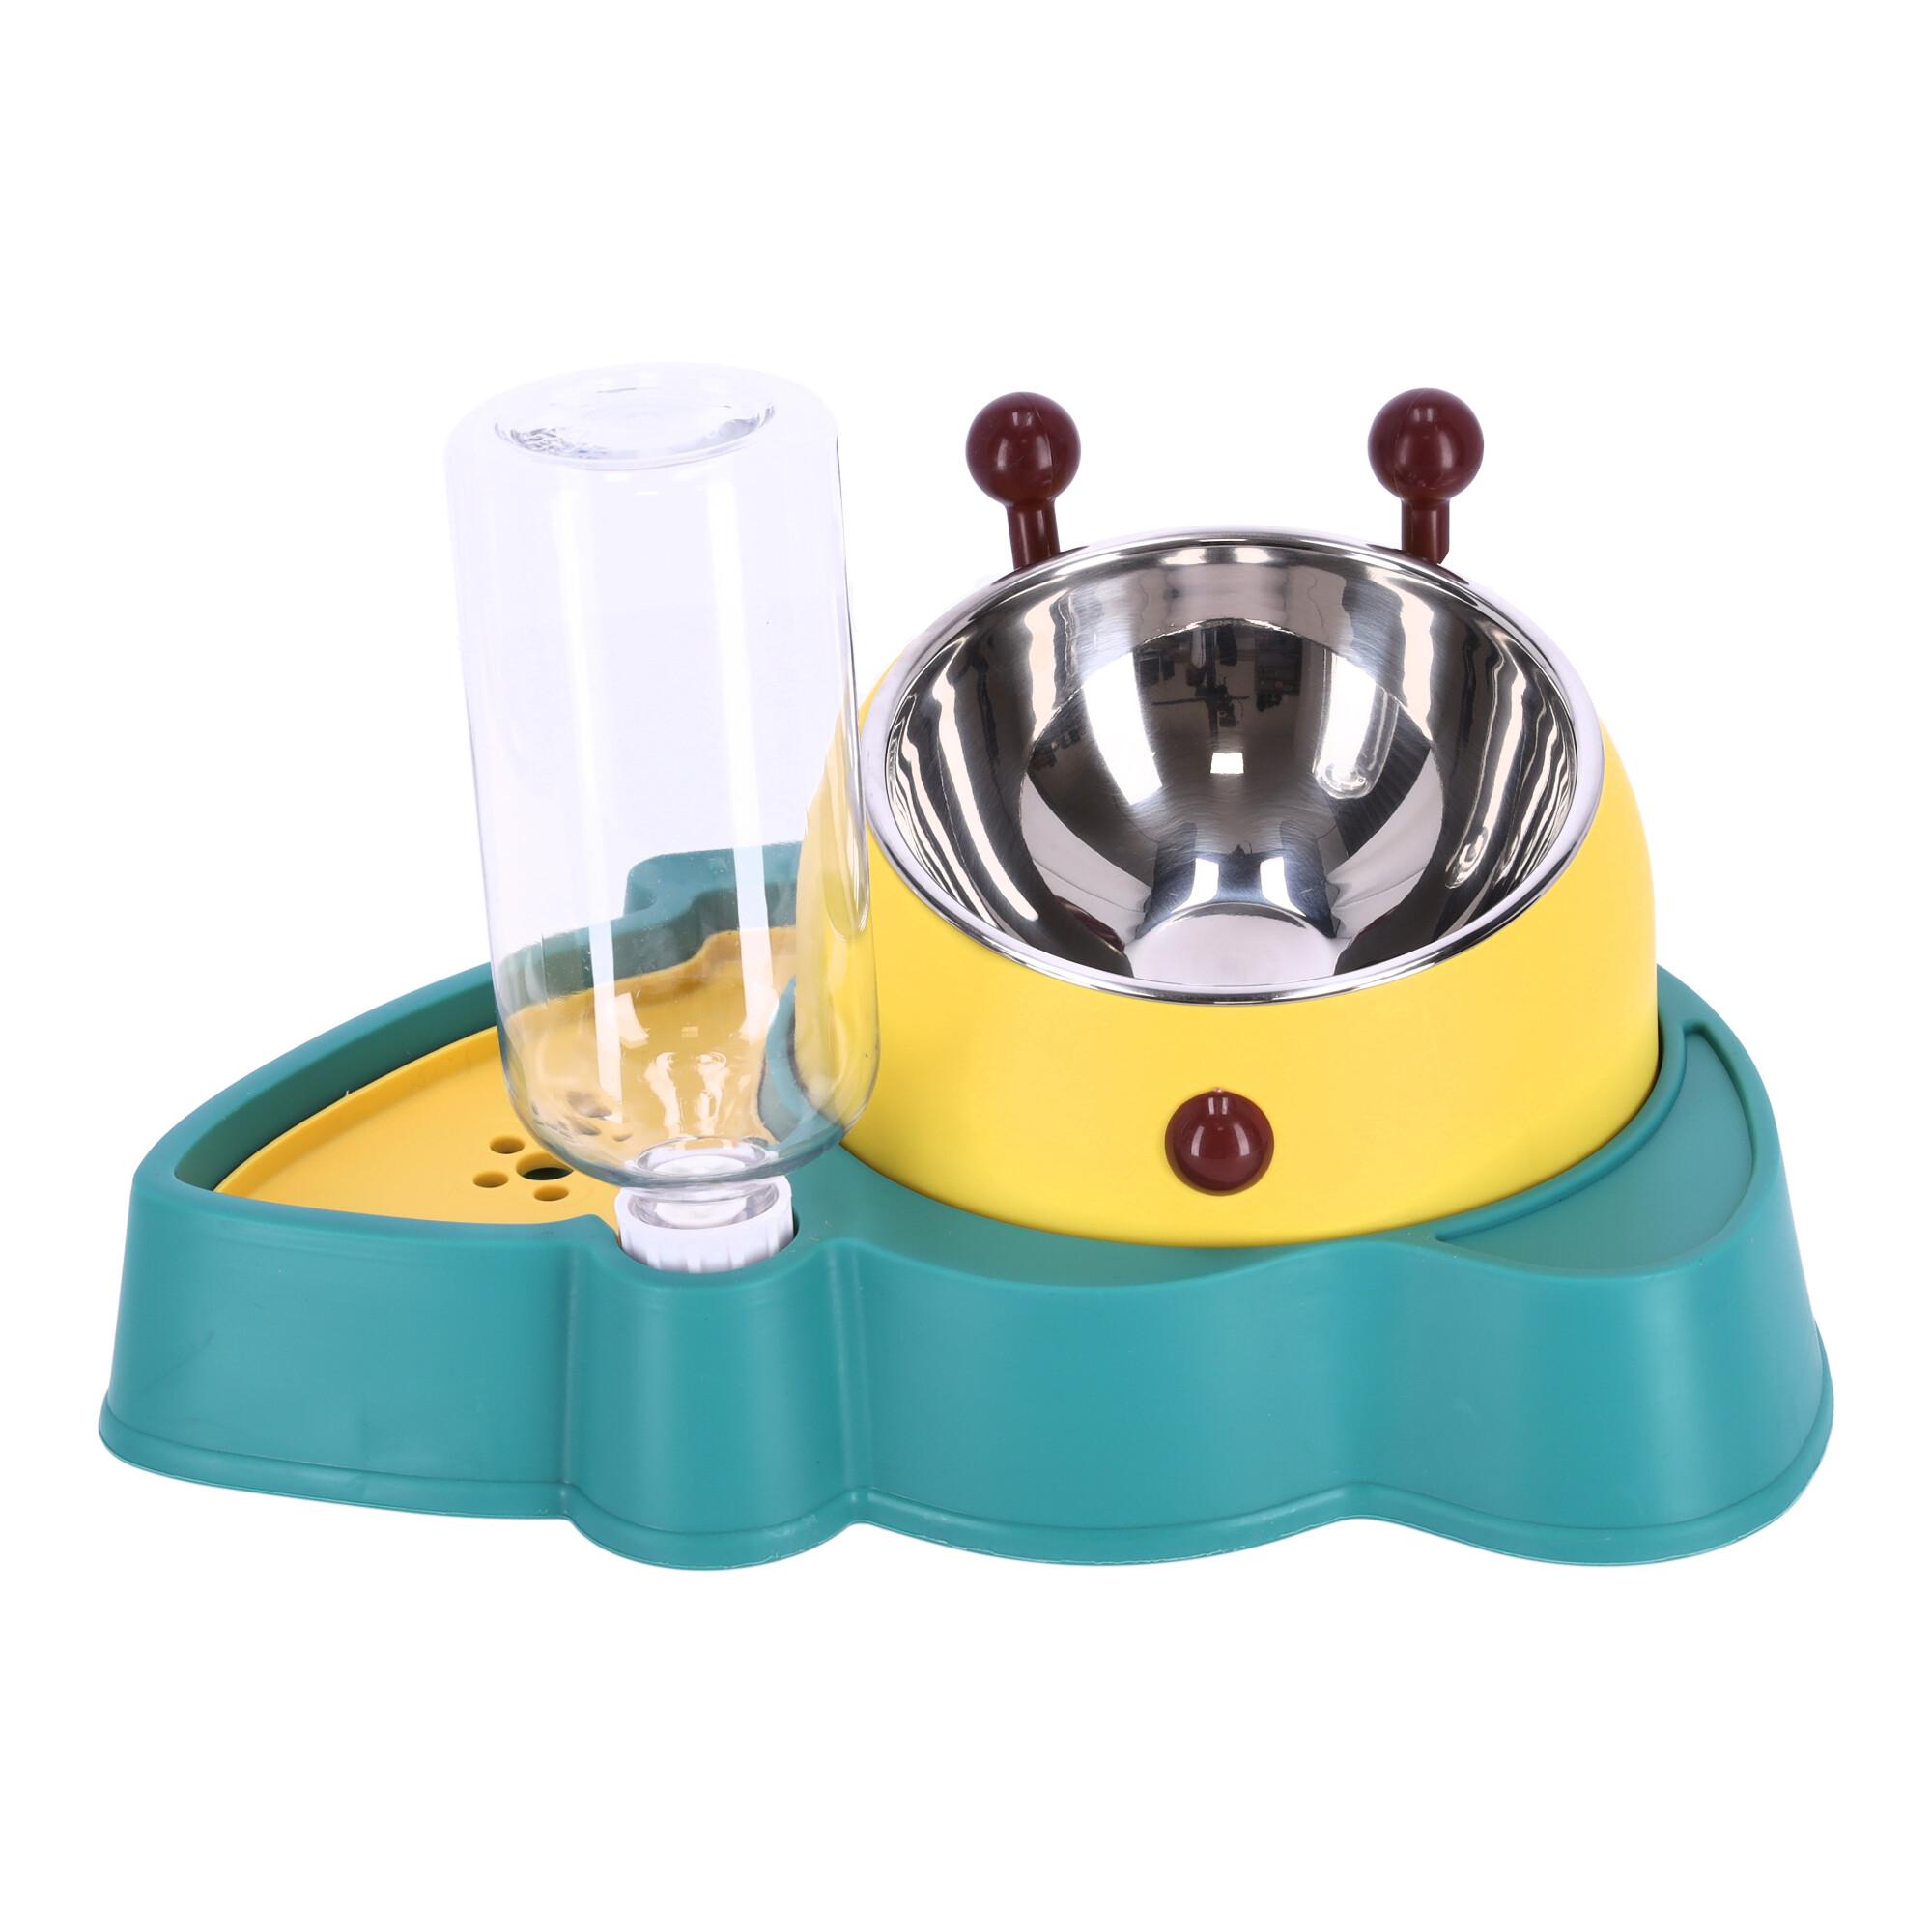 Bowl with automatic water dispenser for dog and cat 2-in-1 - green